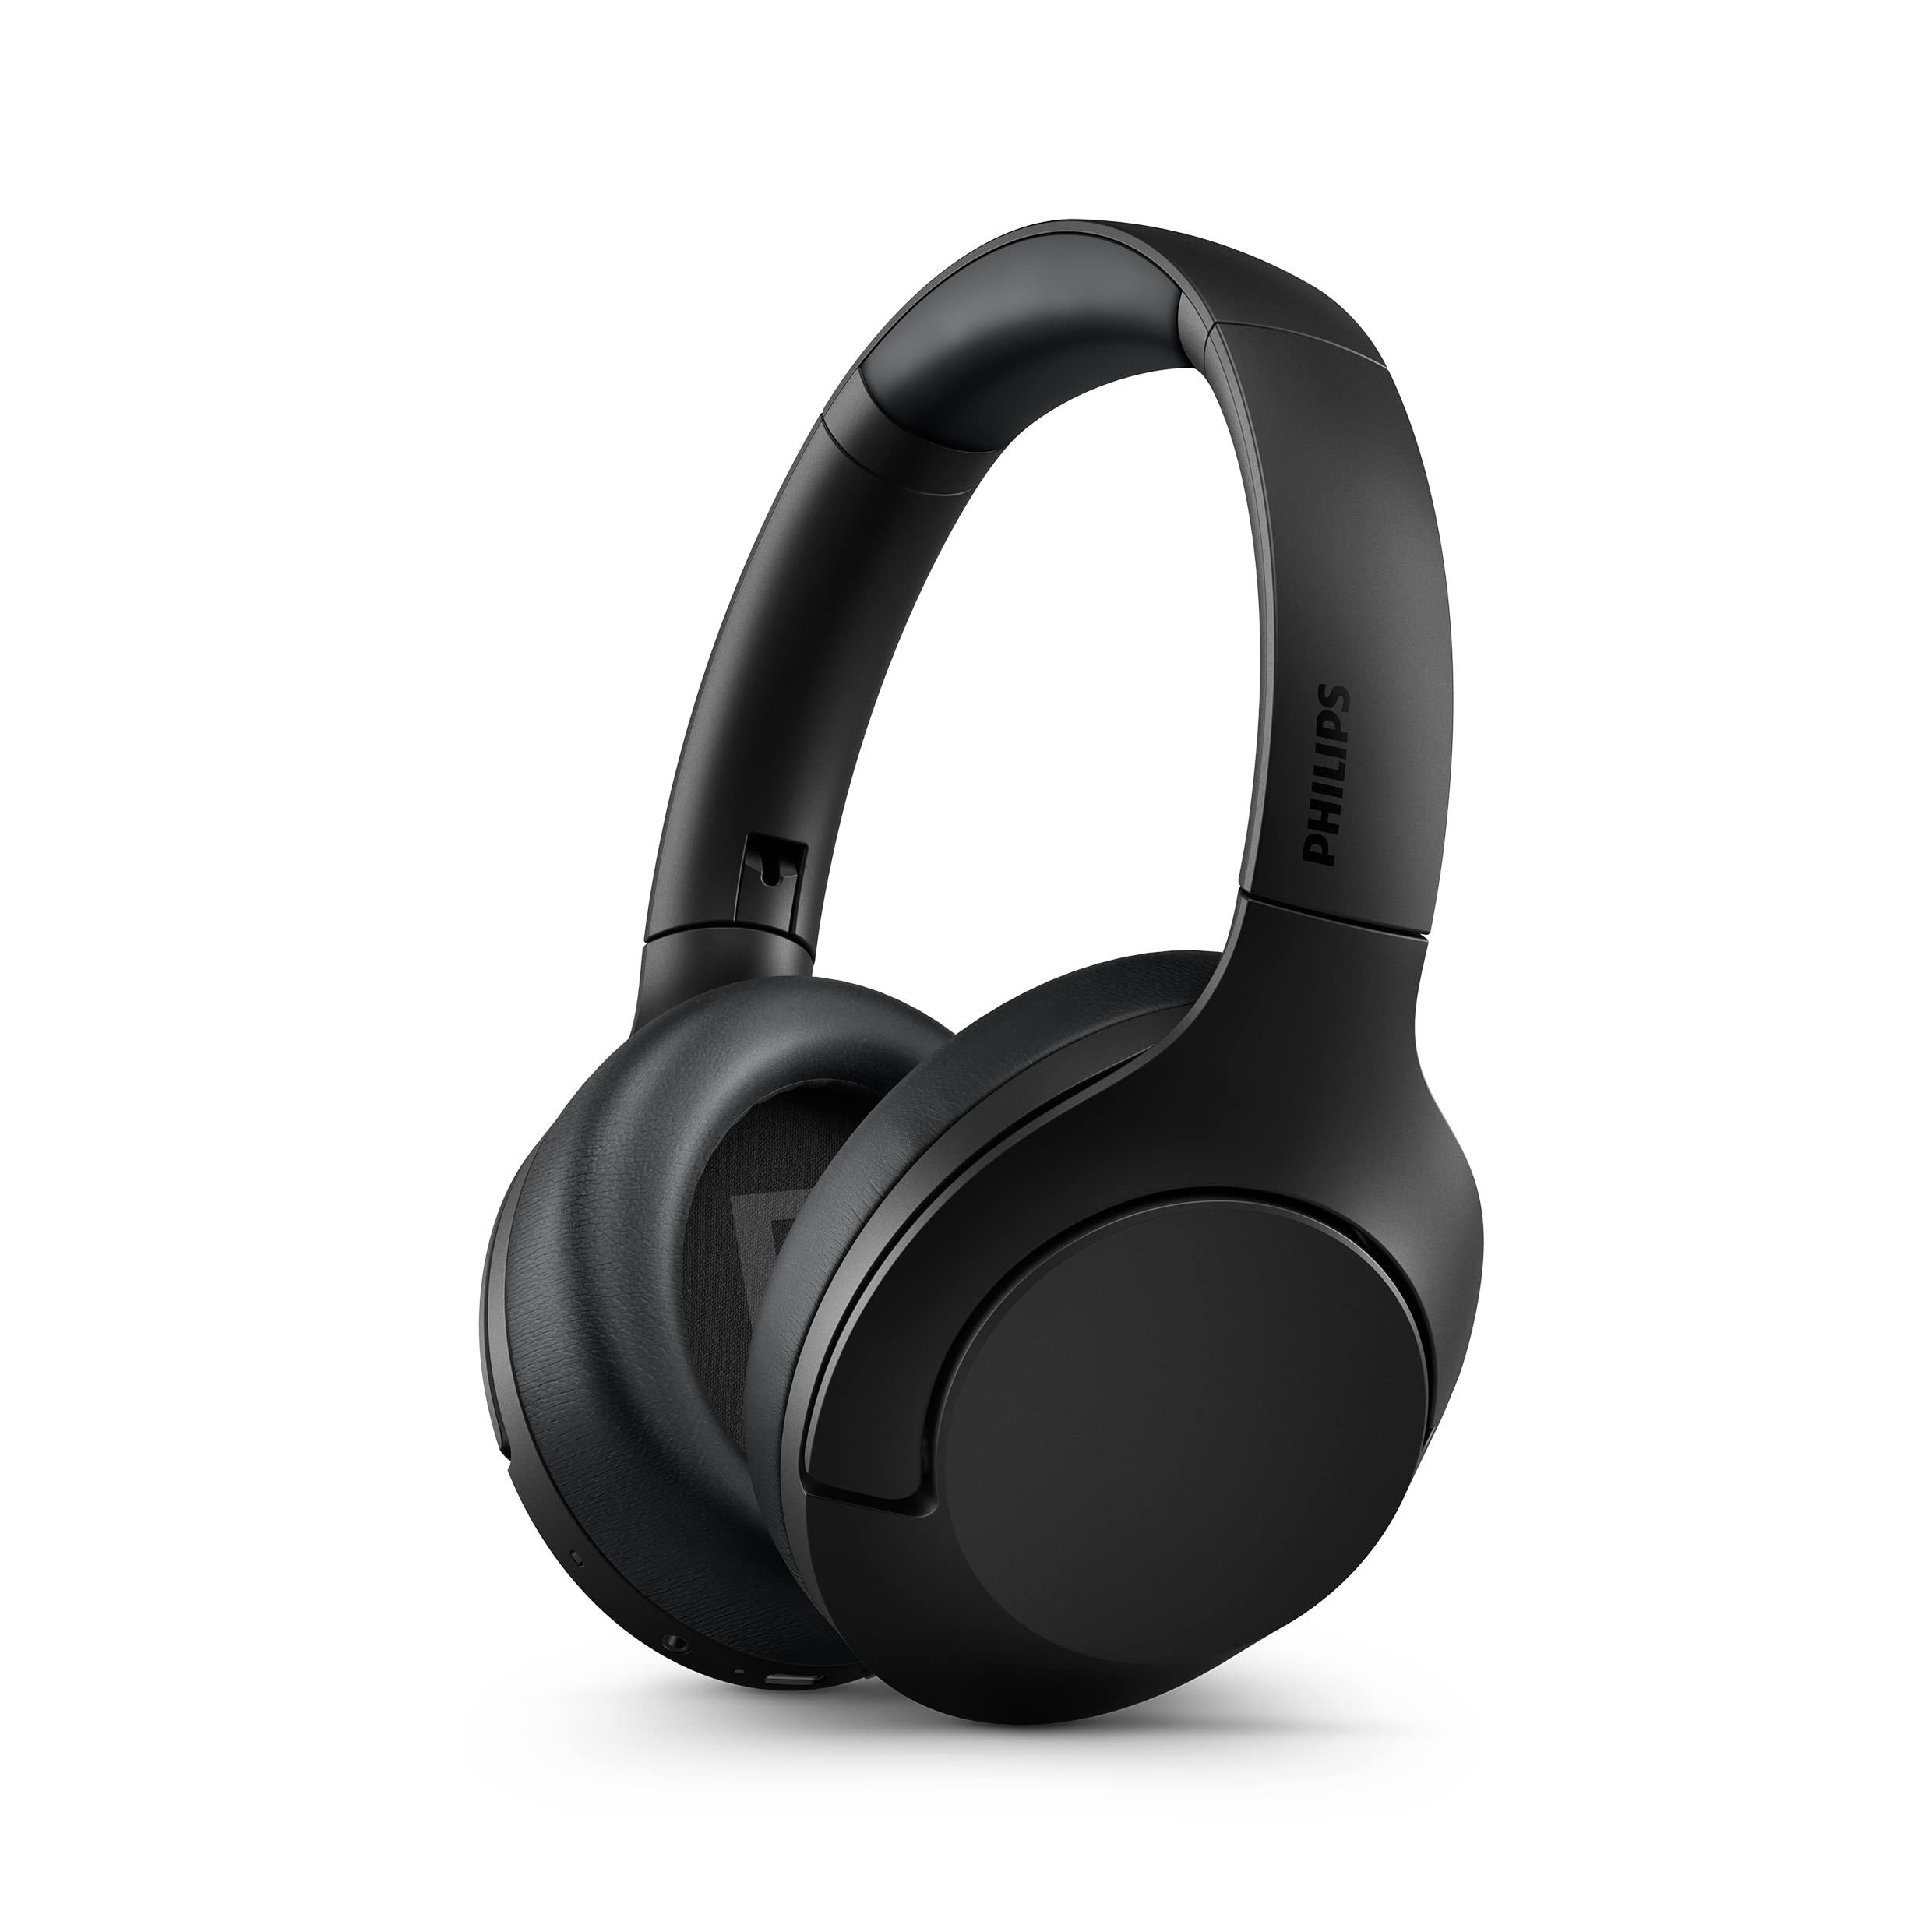 Philips Audio Philips H8506 Over-Ear Wireless Headphones with Noise Canceling Pro (ANC) and Multipoint Bluetooth Connection, Black (TAH8506BK/00)